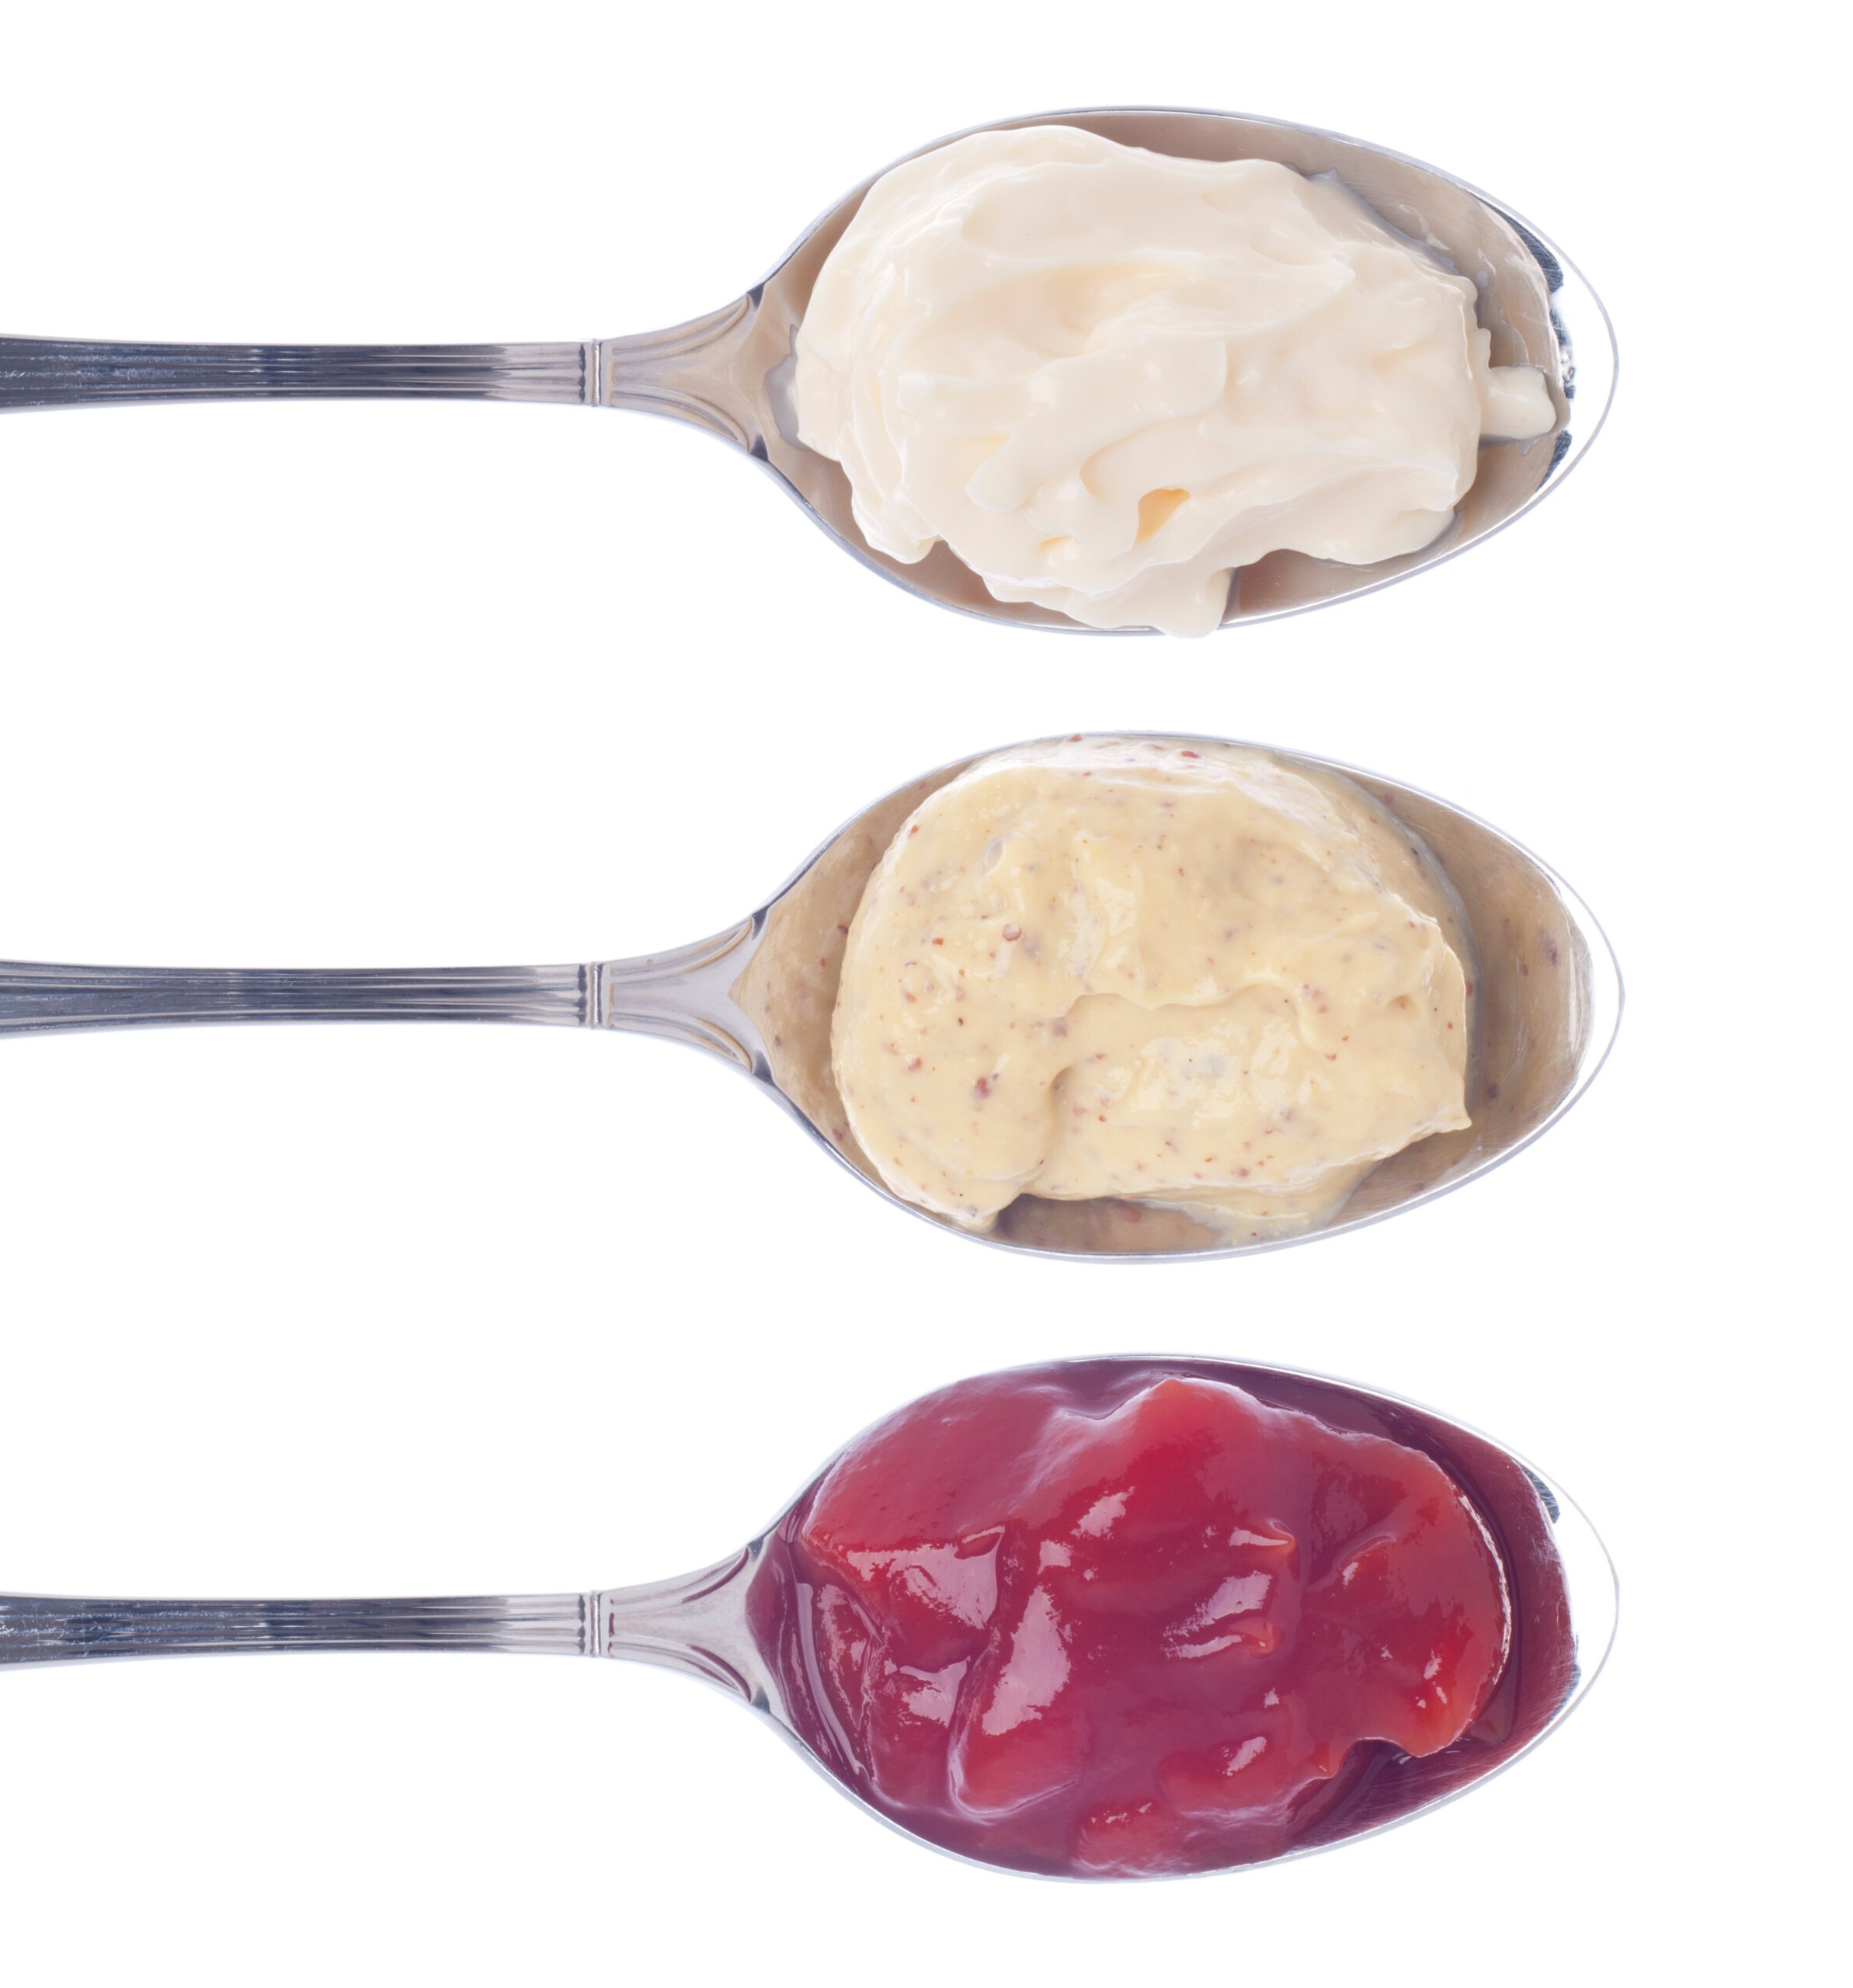 sauces-in-spoons_GkQq3pad-scaled Say Goodbye to Unsafe Diets: Try These Natural Weight Reduct...